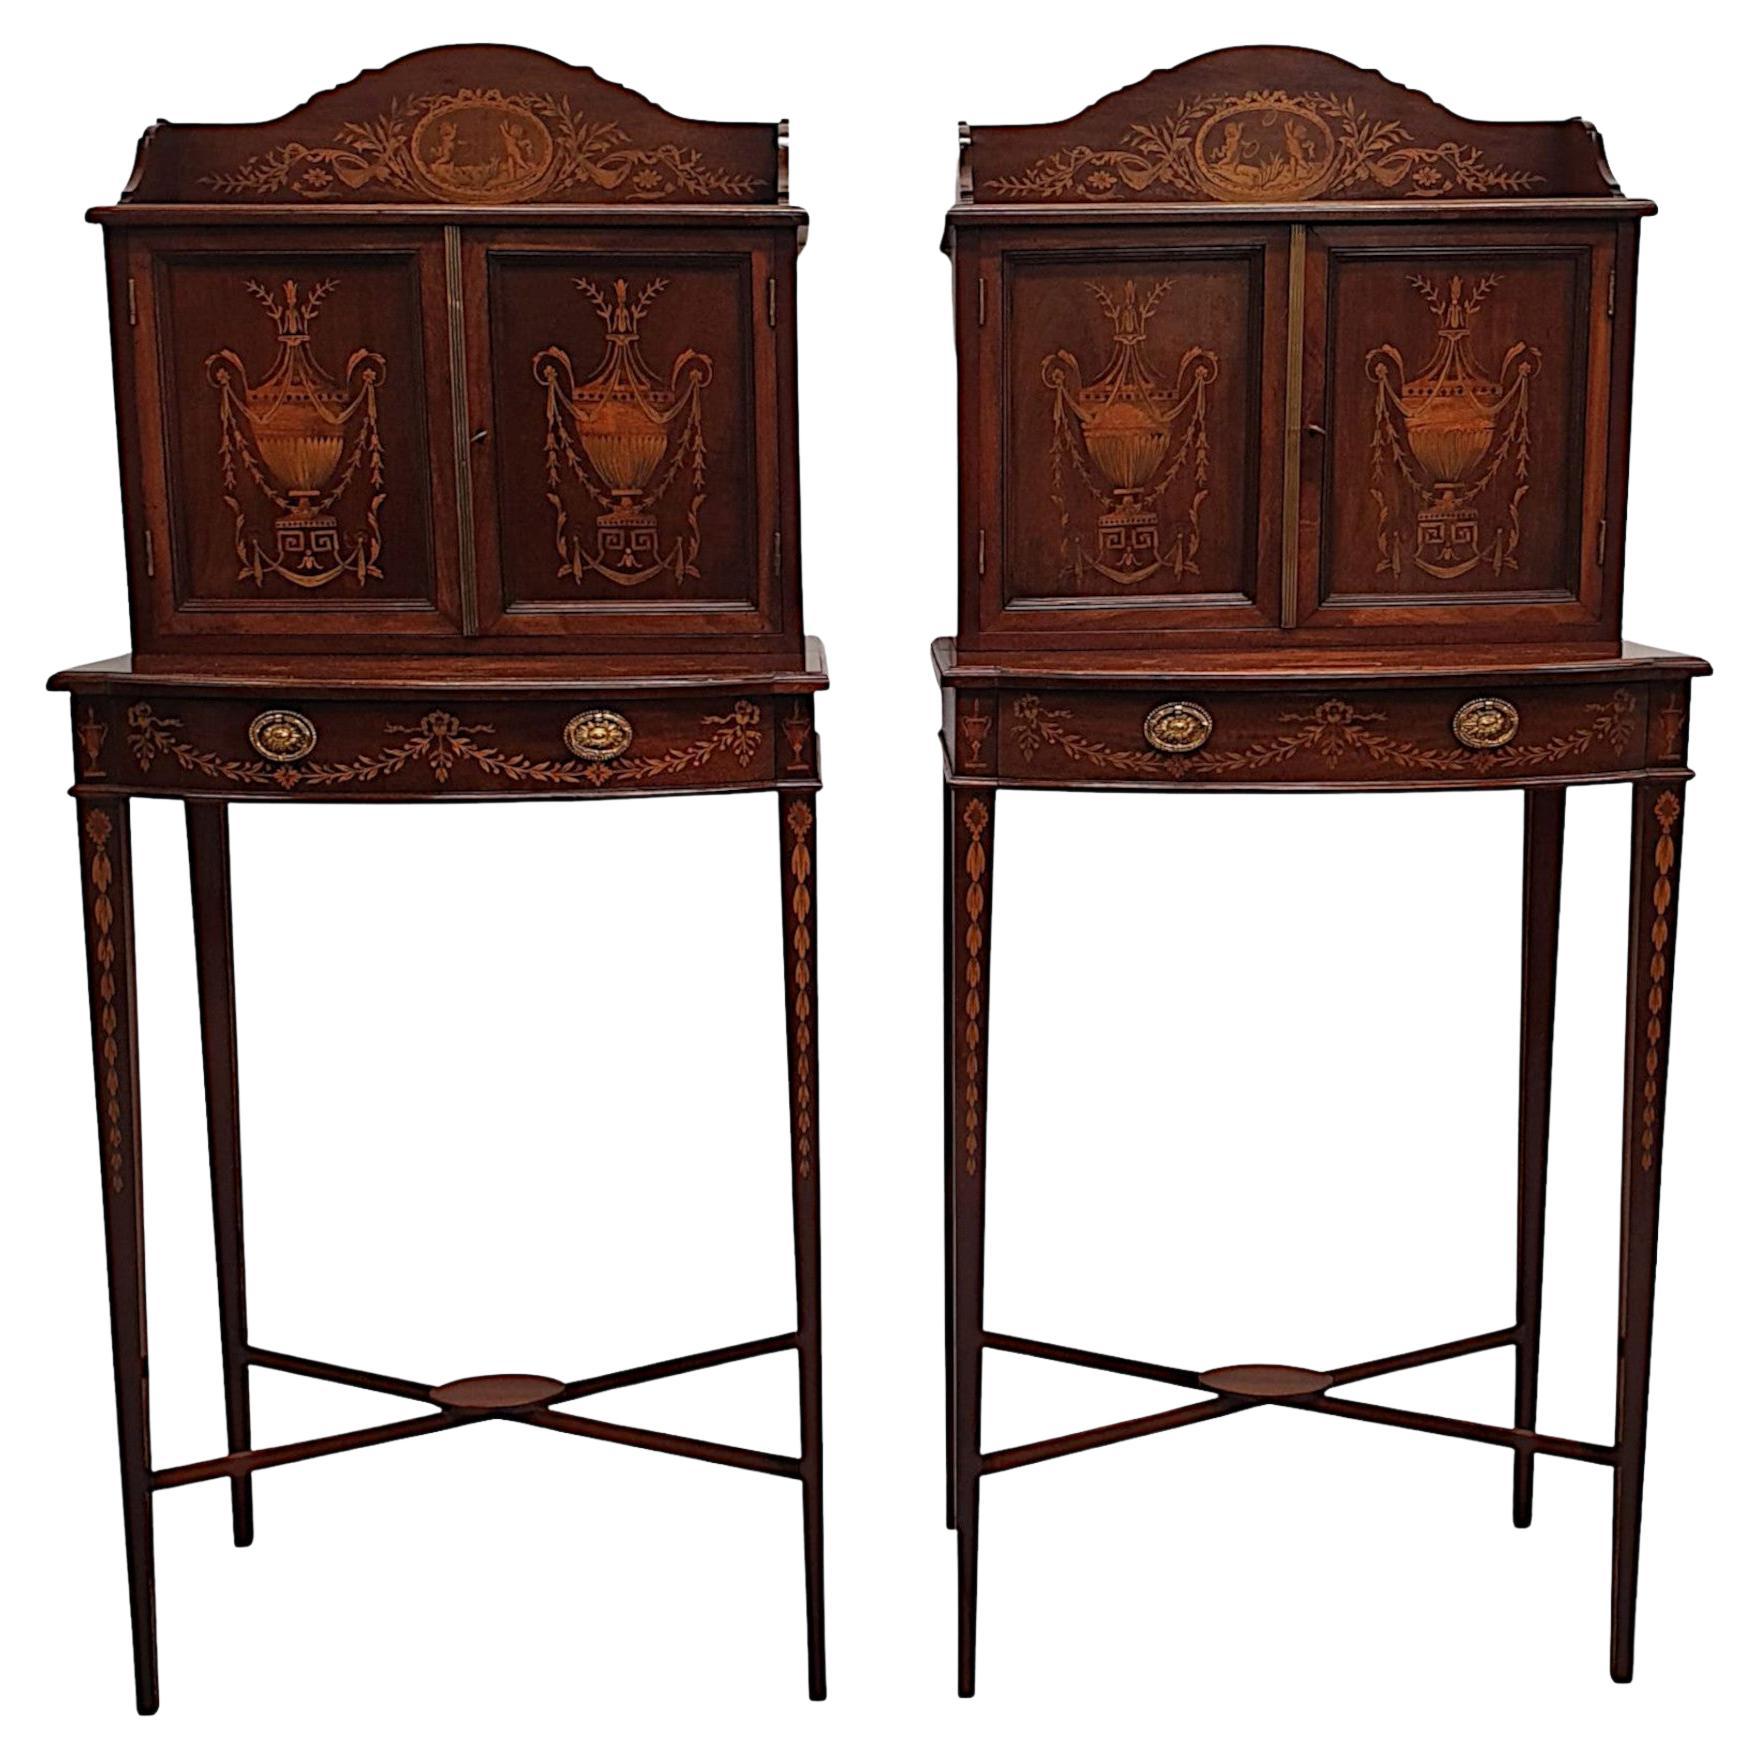  A Rare Pair of Exceptional Edwardian Cabinets Attributed to Edward and Roberts